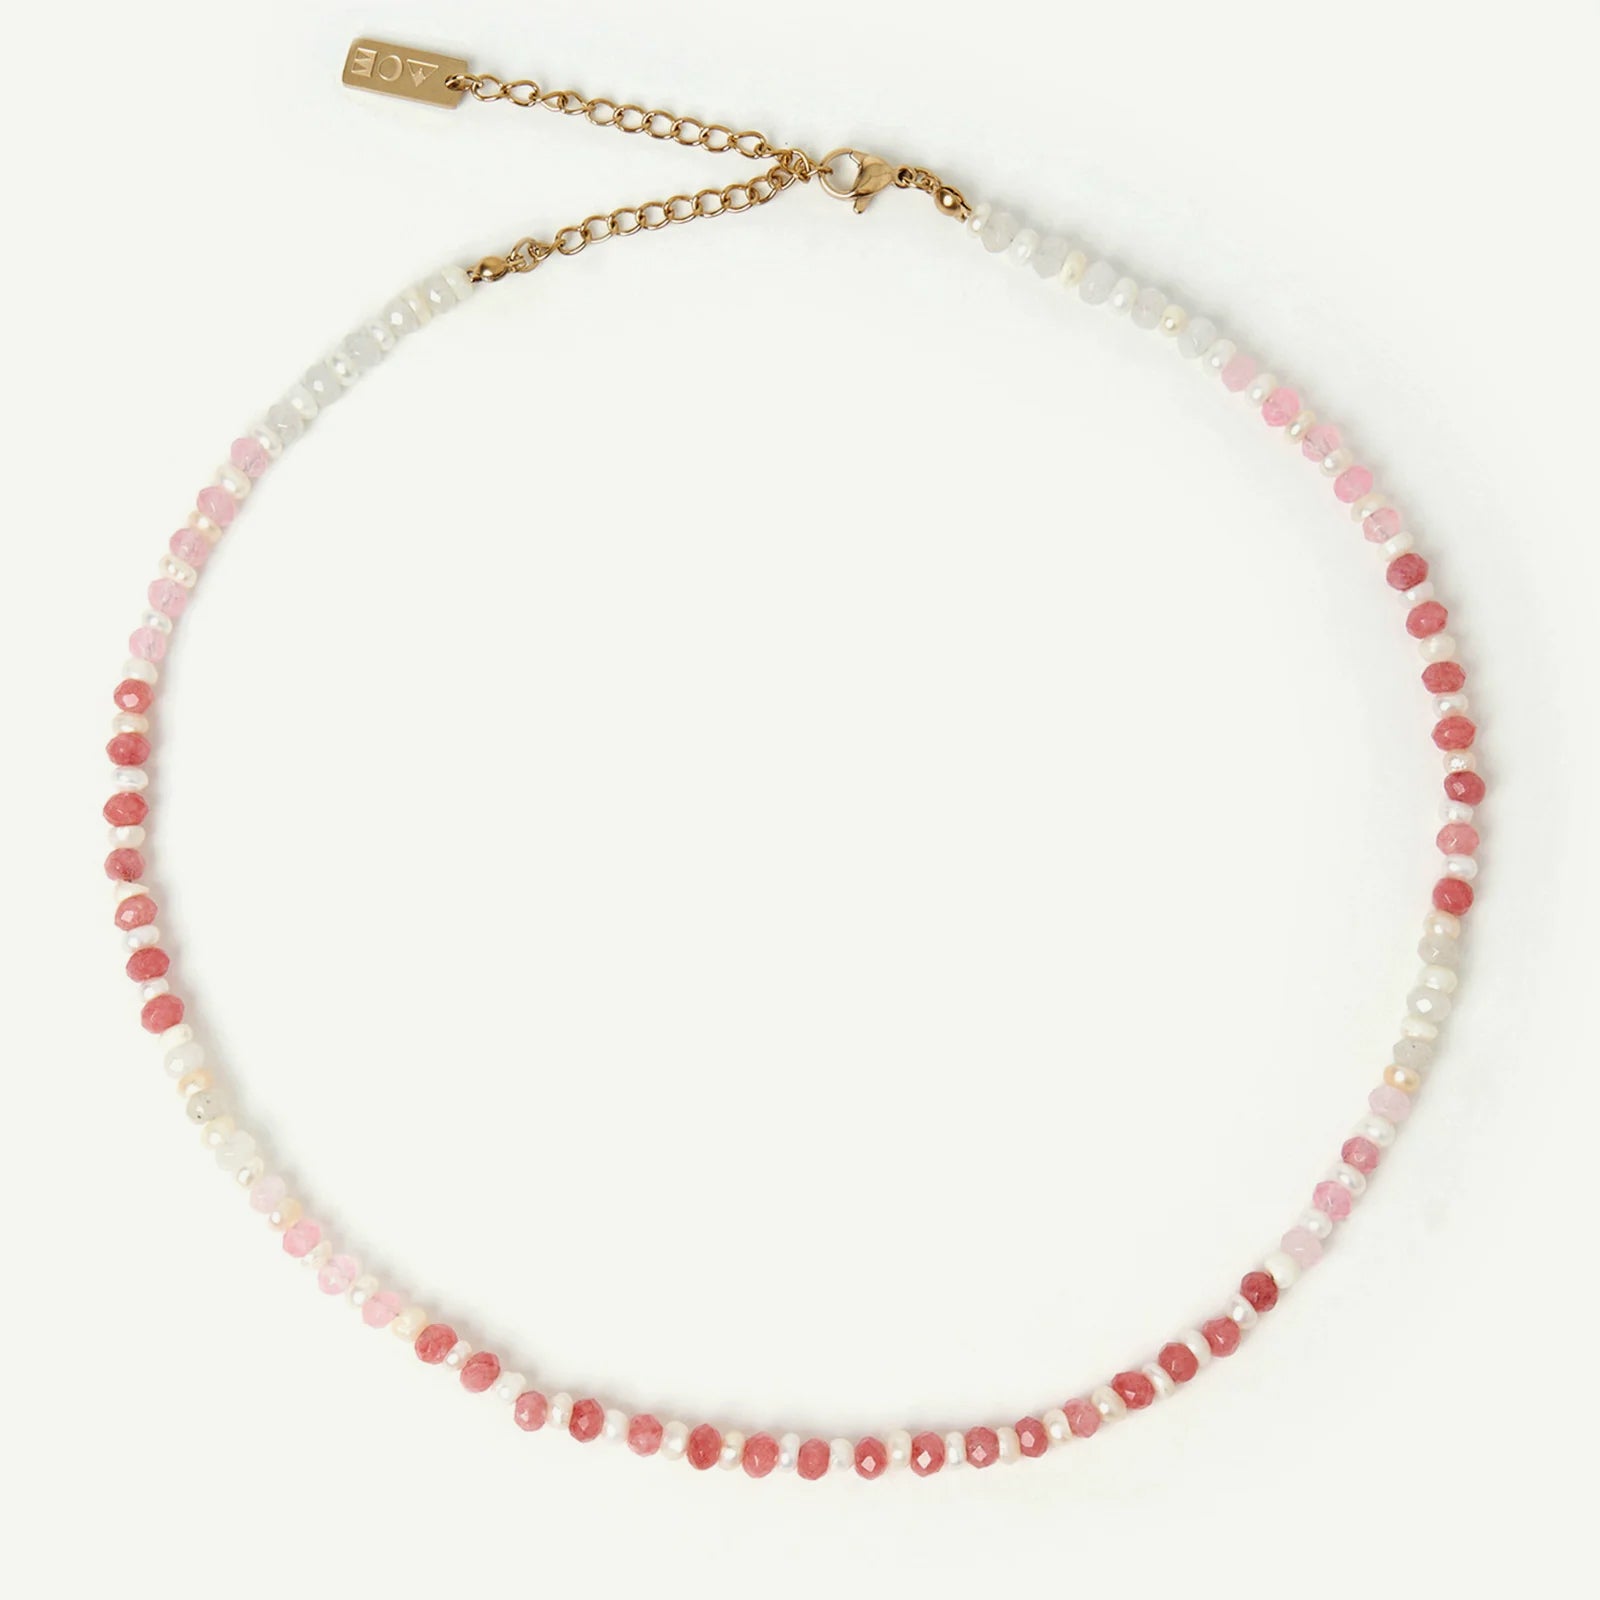 Bloom Pearl  and Gemstone Necklace